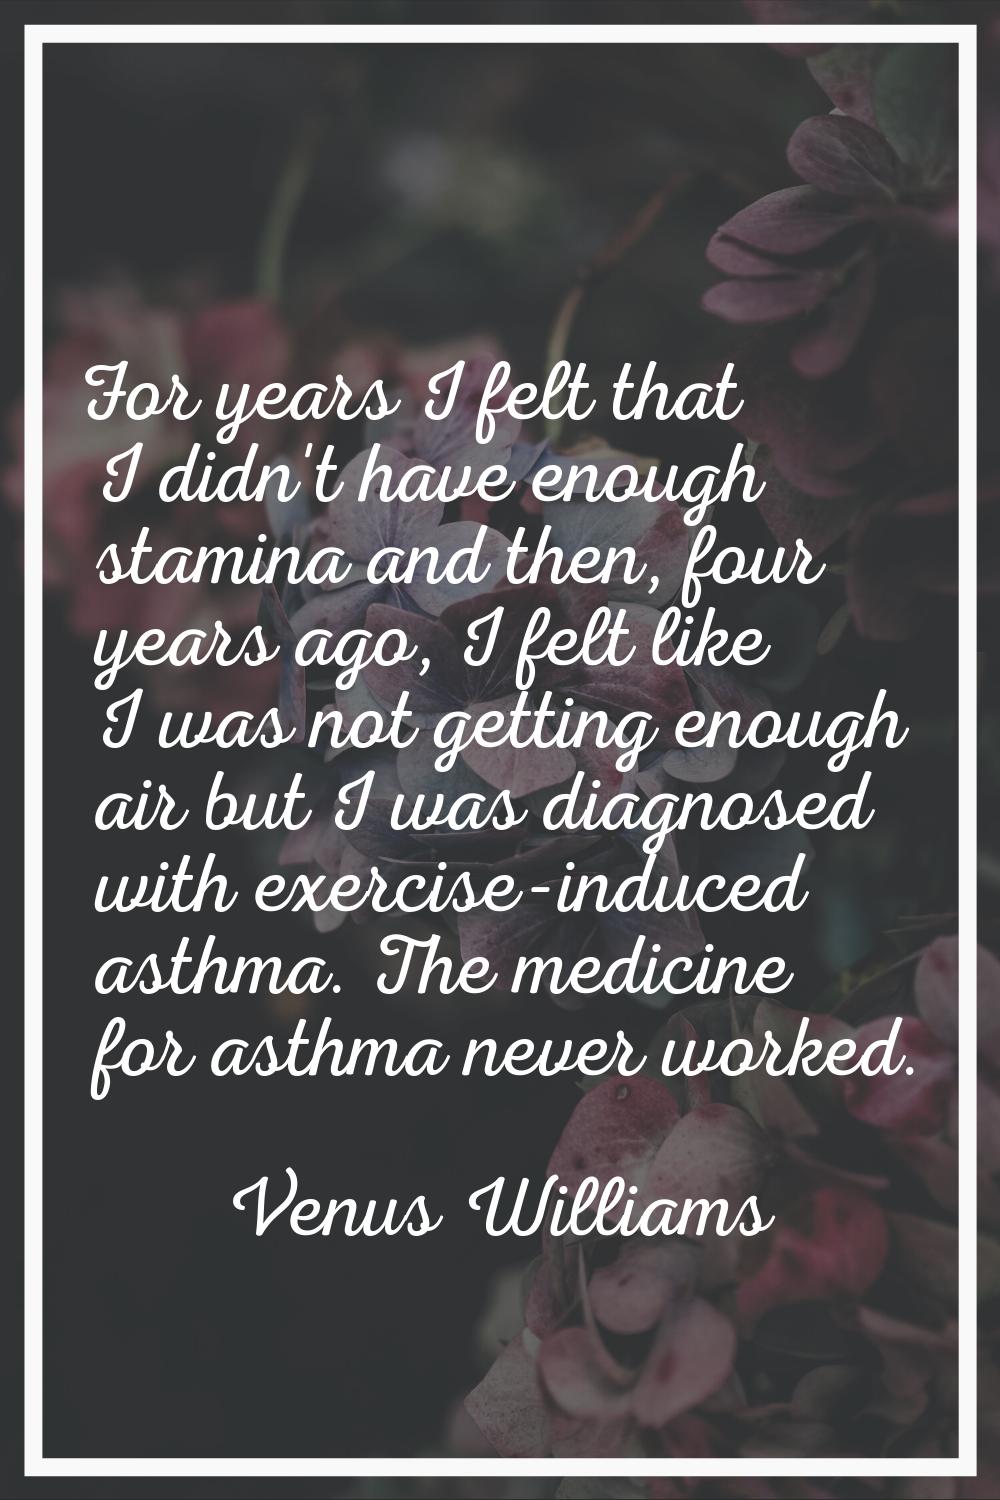 For years I felt that I didn't have enough stamina and then, four years ago, I felt like I was not 